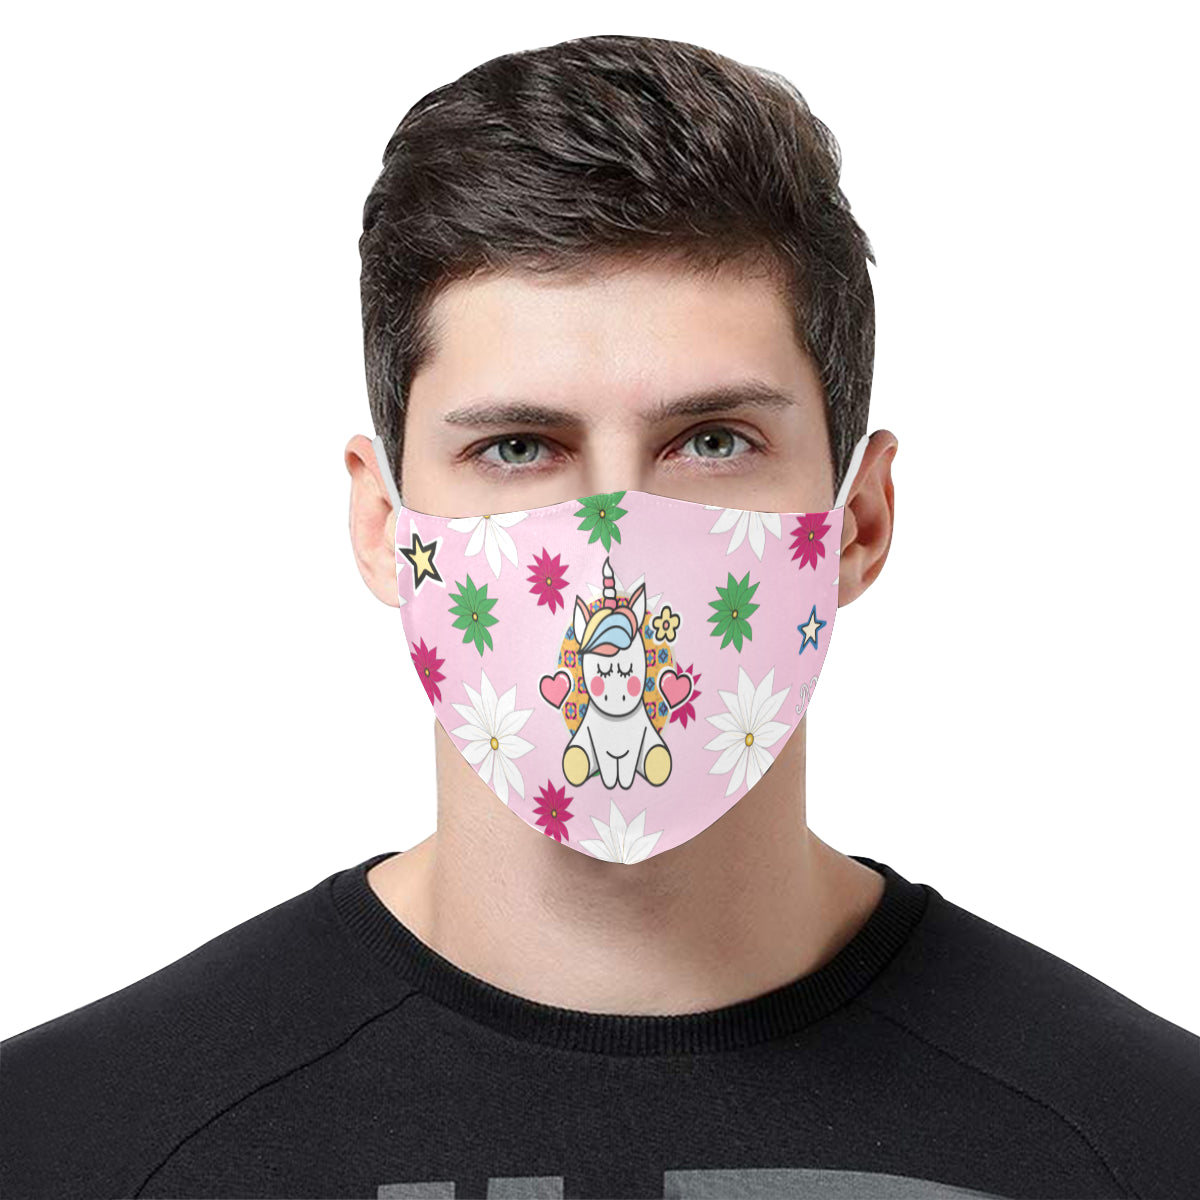 Unicorn Alternate Cotton Fabric Face Mask with Filter Slot & Adjustable Strap (Pack of 5) - Non-medical use